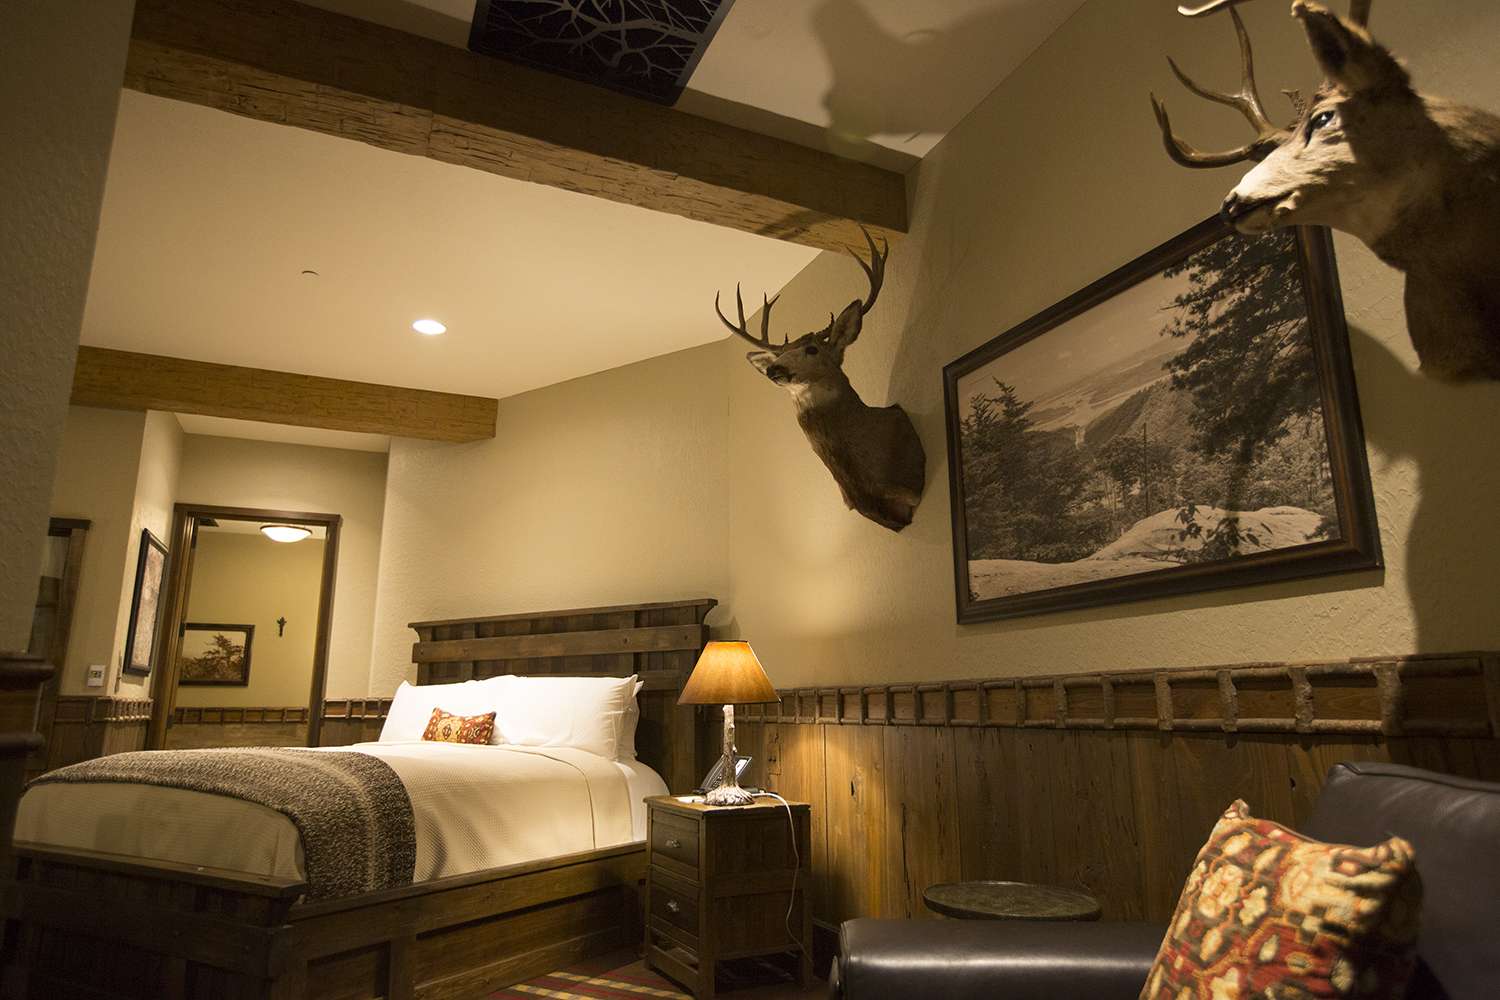 Overlooking the Bass Pro Shops vast cypress and wetlands expanse, the rustic-styled accommodations feature fireplaces, handcrafted furniture and screened-in porches.